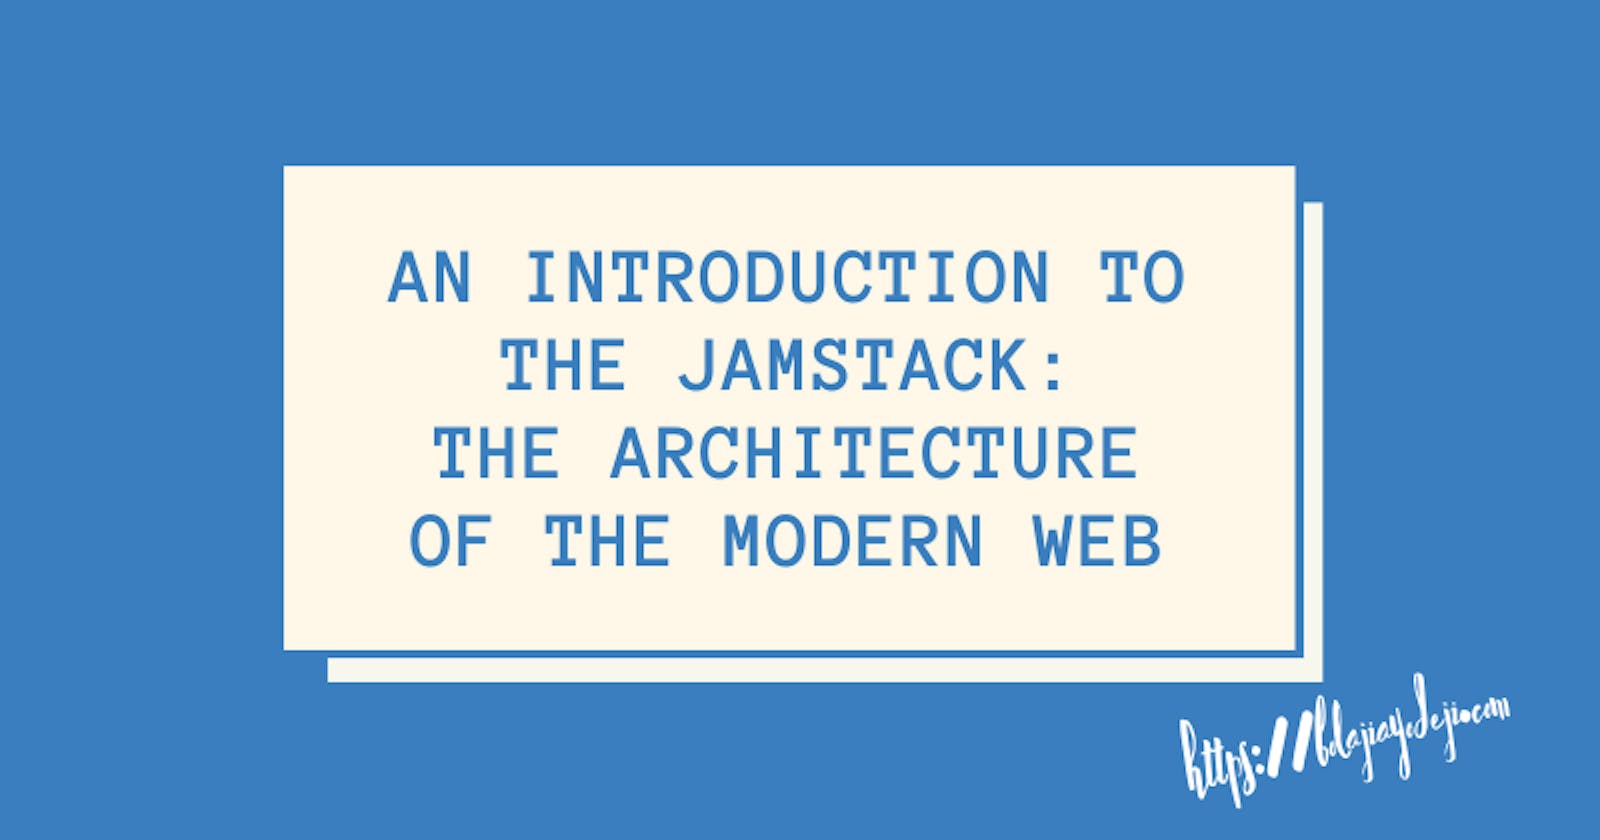 Introducing JAMstack: the Architecture of the Modern Web